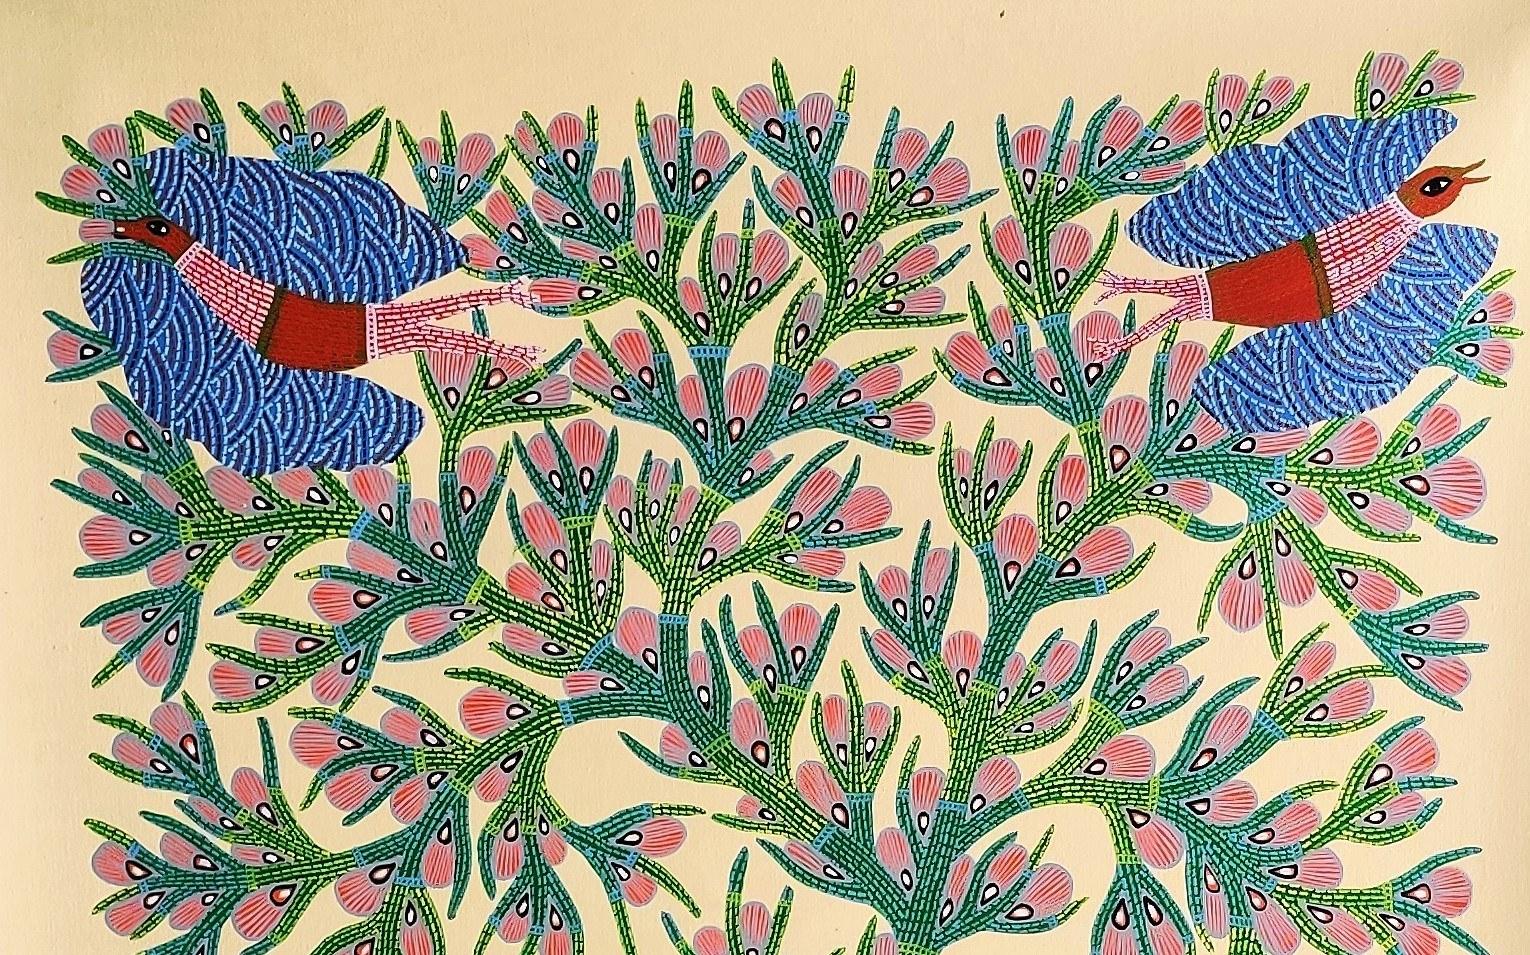 Acrylic paint and ink on canvas 
Unique work
Signed lower right
Ram Singh Urveti is part of the Gond tribe in the center of India.

This painting depicts birds and trees in nature. 
It shows the symbiotic relationships between animals and trees.